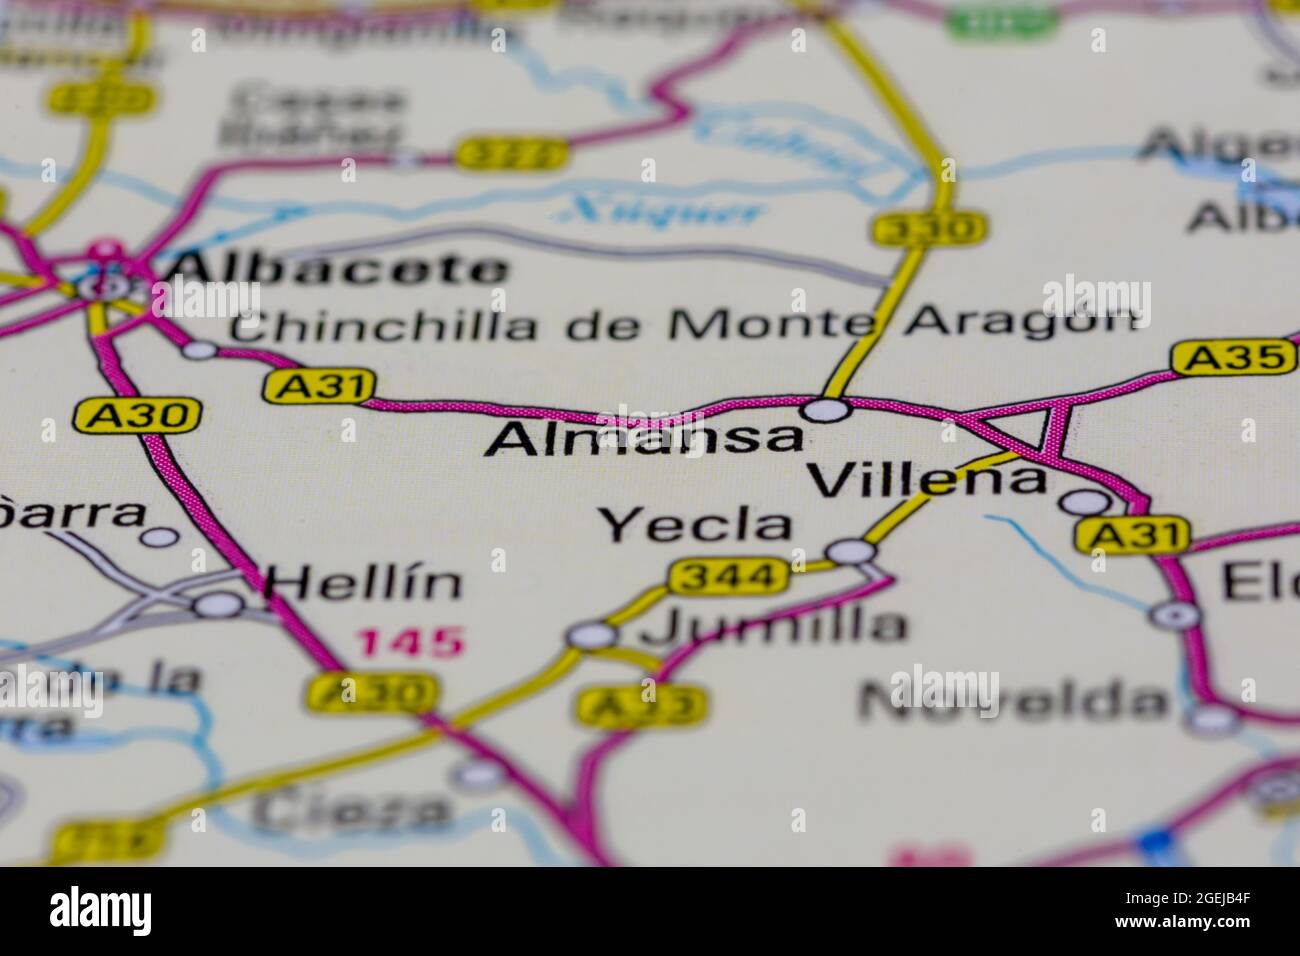 Almansa Spain shown on a road map or Geography map Stock Photo